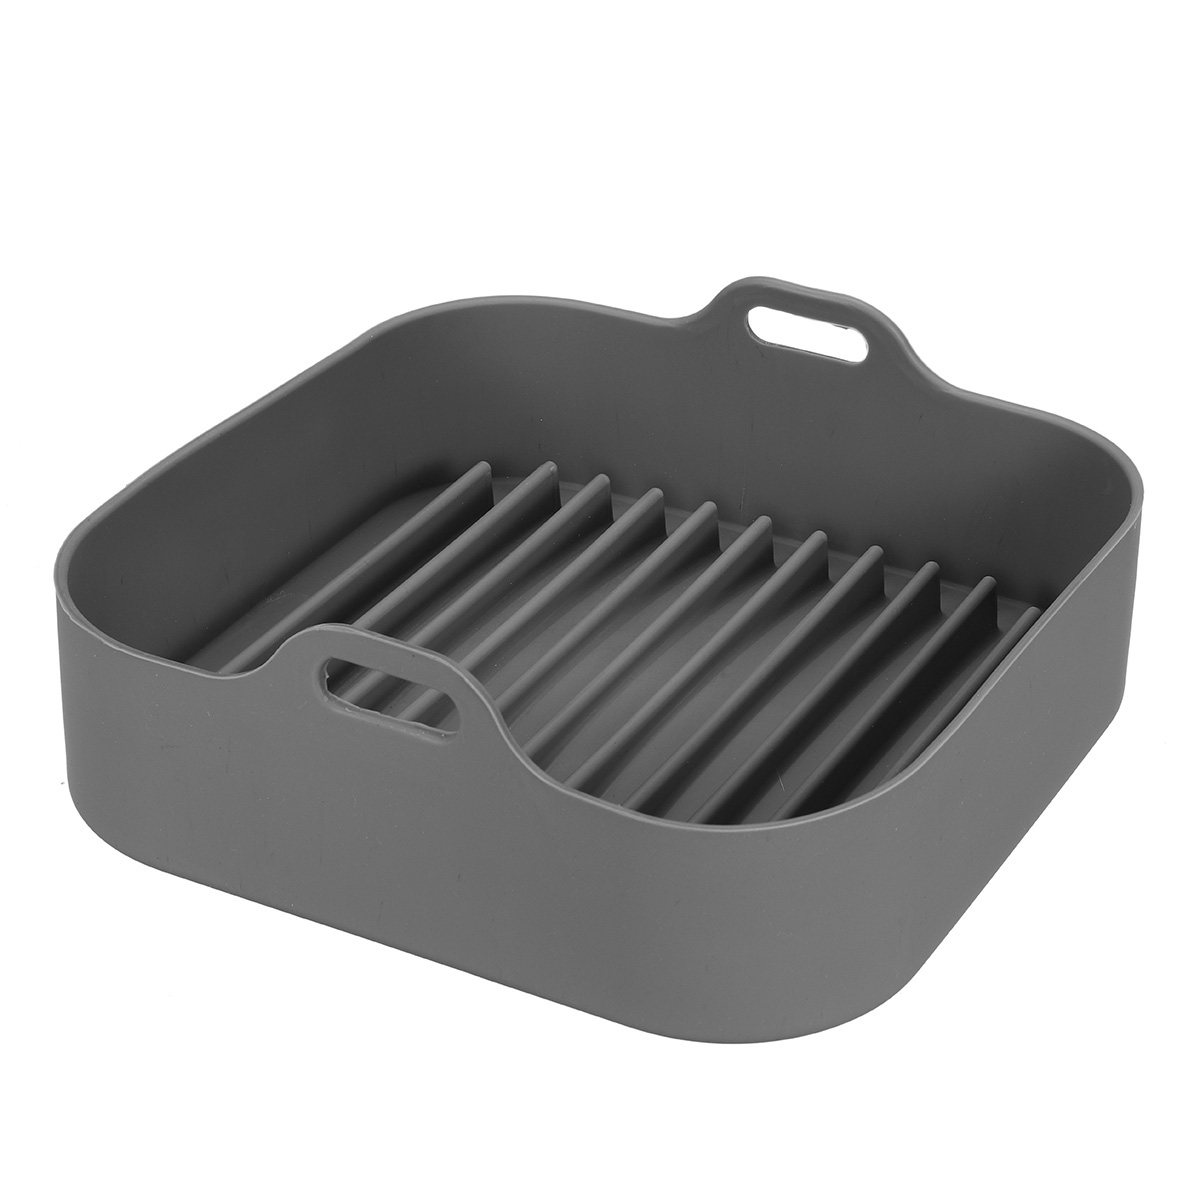 Multifunctional-Silicone-Baking-Tray-High-Temperature-Resistant-Non-stick-Bread-Fried-Baking-Pan-wit-1864776-16